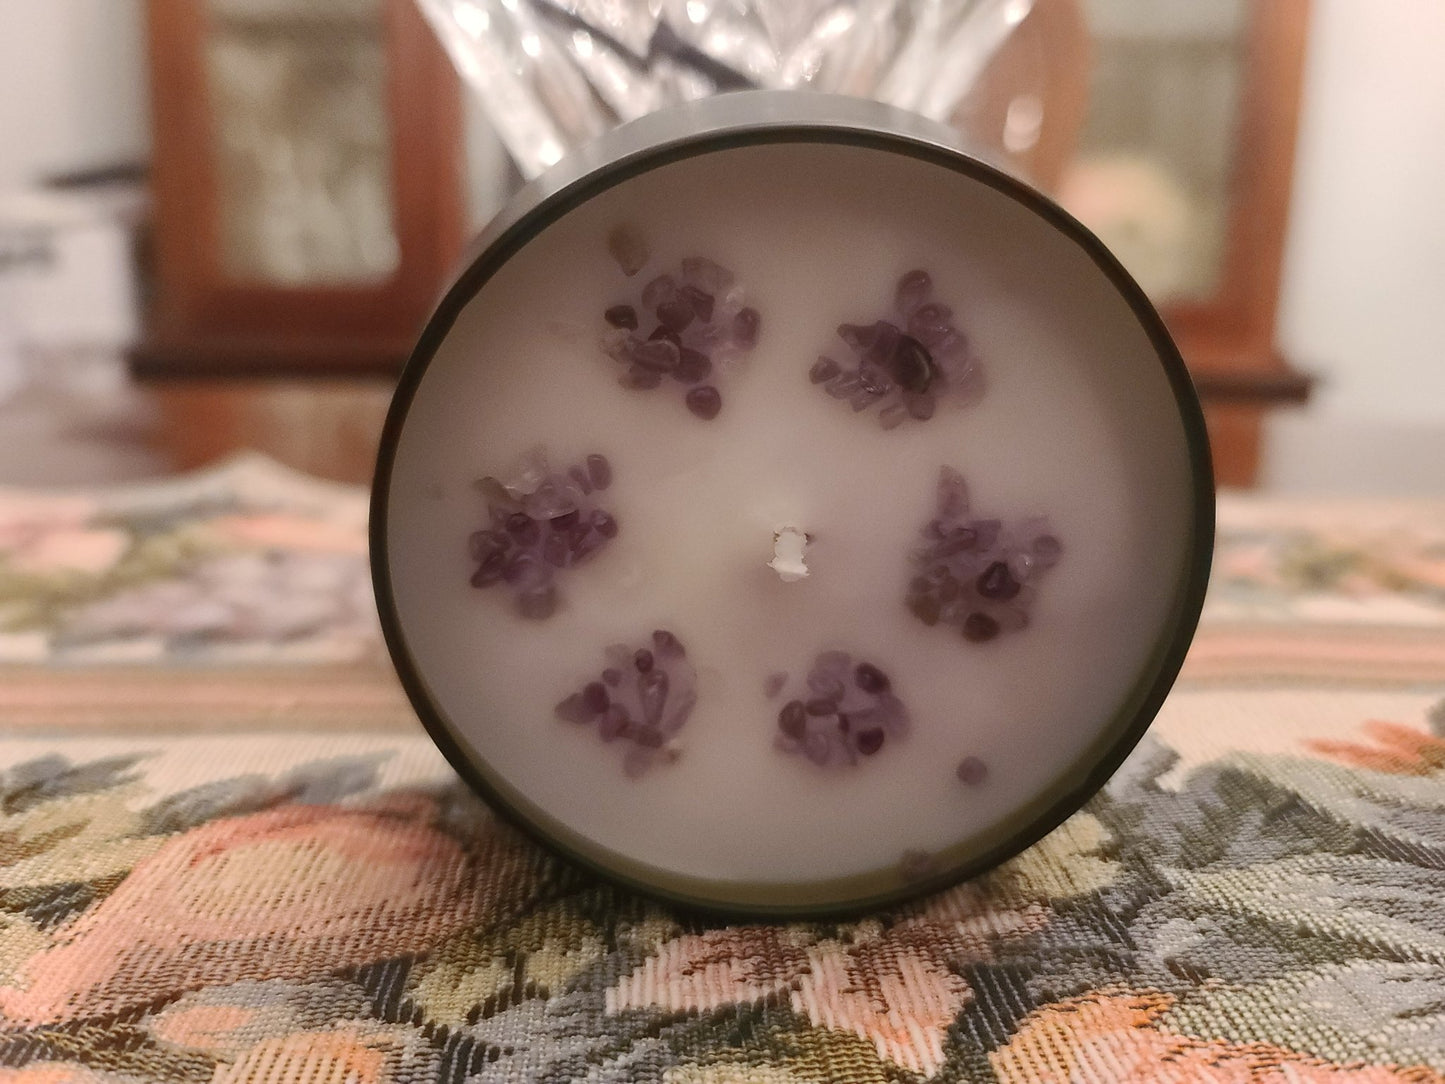 Mindful Candles - Slumber 7oz - Licentious TreatsMindful Candles - Slumber 7oz